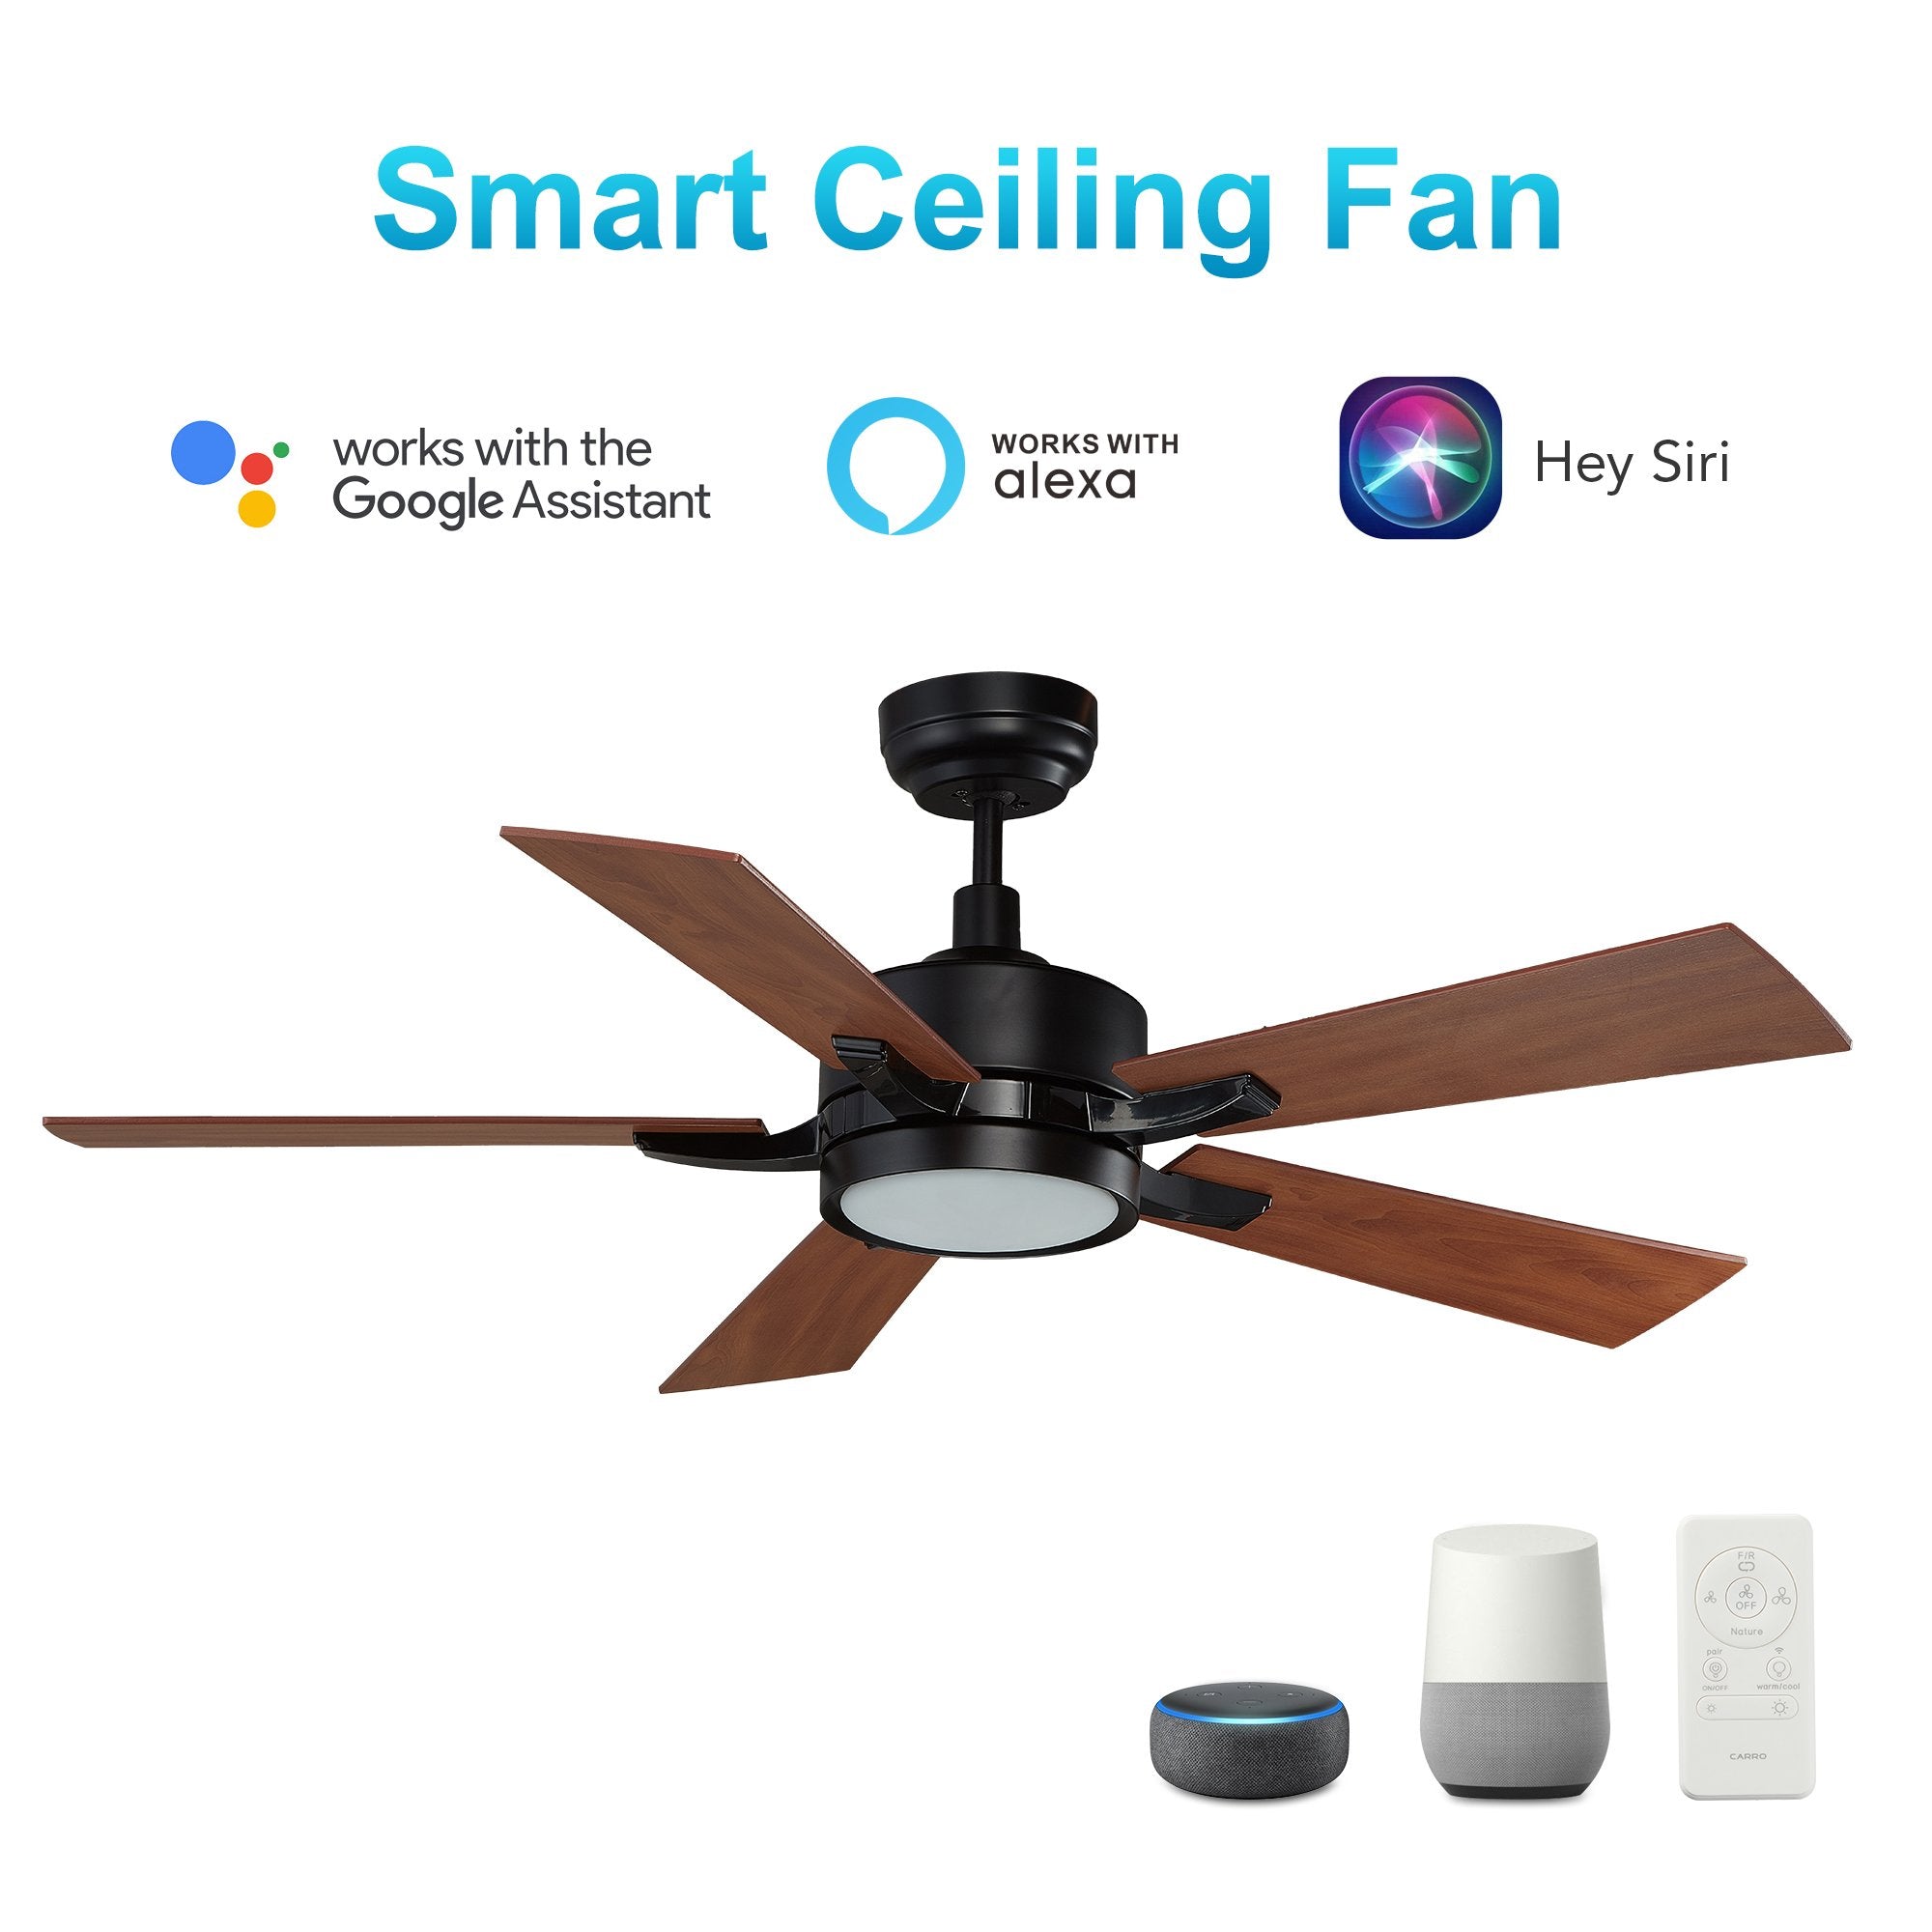 Apex 56'' Best Smart Ceiling Fan with Remote, Light Kit Included, Works with Google Assistant, Alexa, Siri Shortcut